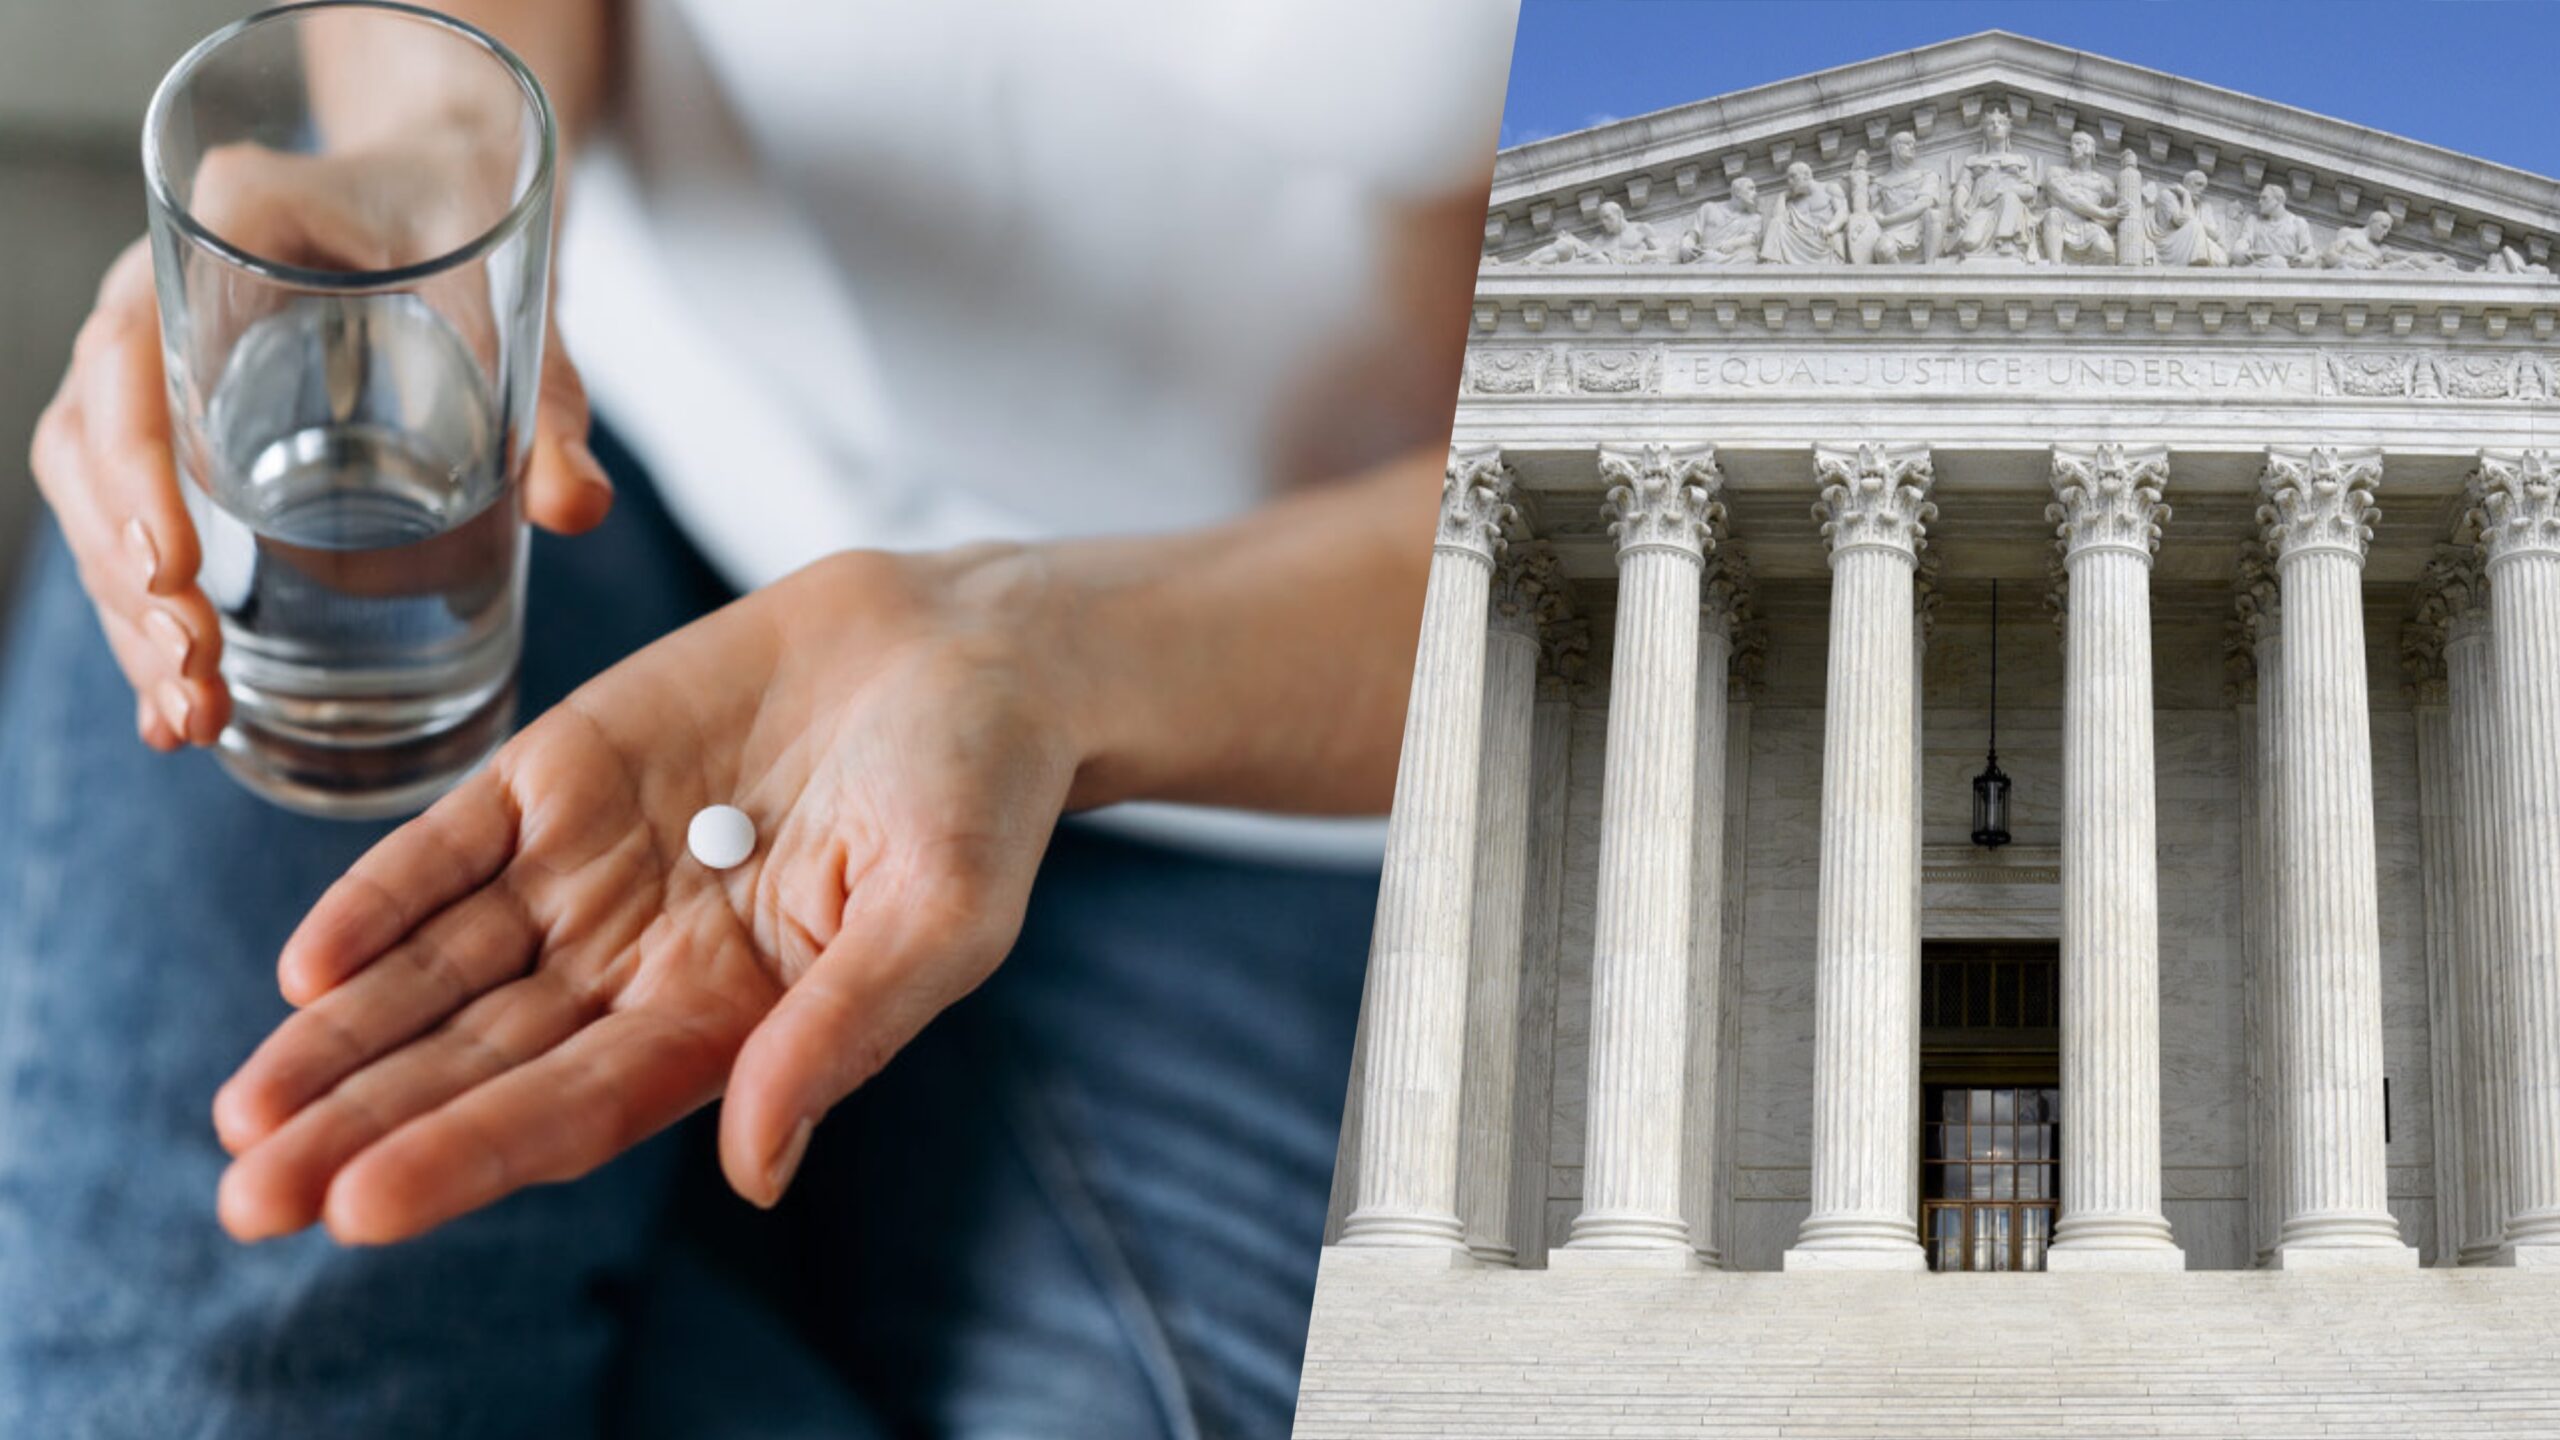 As Abortion Pill Cases Hit The Supreme Court, US Sees Highest Number Of Abortions In Over A Decade - Harbingers Daily